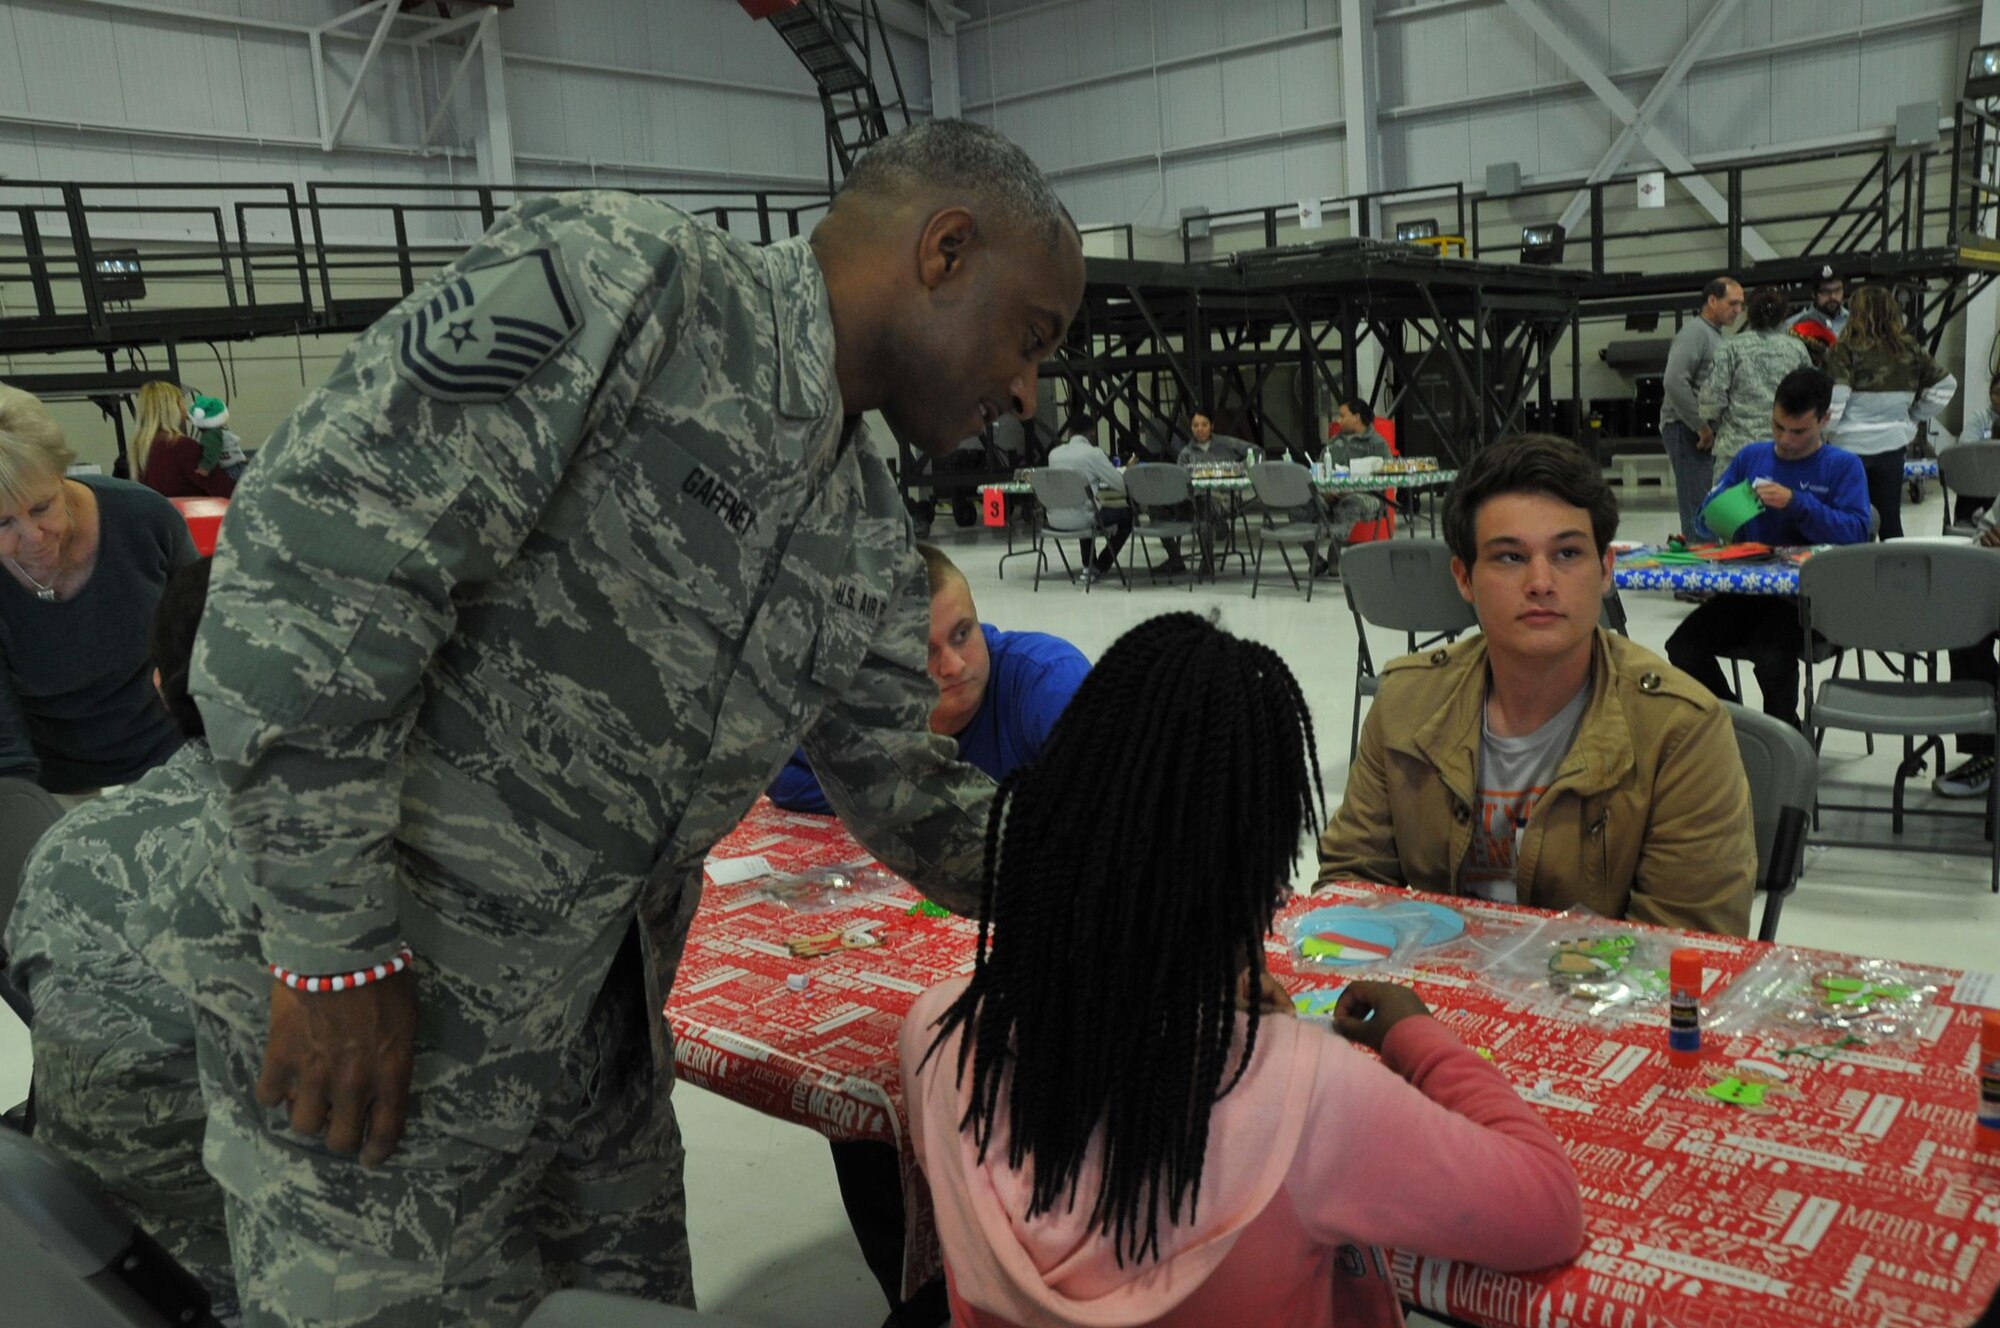 Master Sgt. David Gaffney, 403rd Wing recruiter from the Mobile office, watches and helps his daughter at the ornament table.  Members of the 403rd Wing and their families visit with Santa during the 403rd Wing children's holiday party Dec. 3, 2016.  (U.S. Air Force photo/Master Sgt. Jessica Kendziorek)